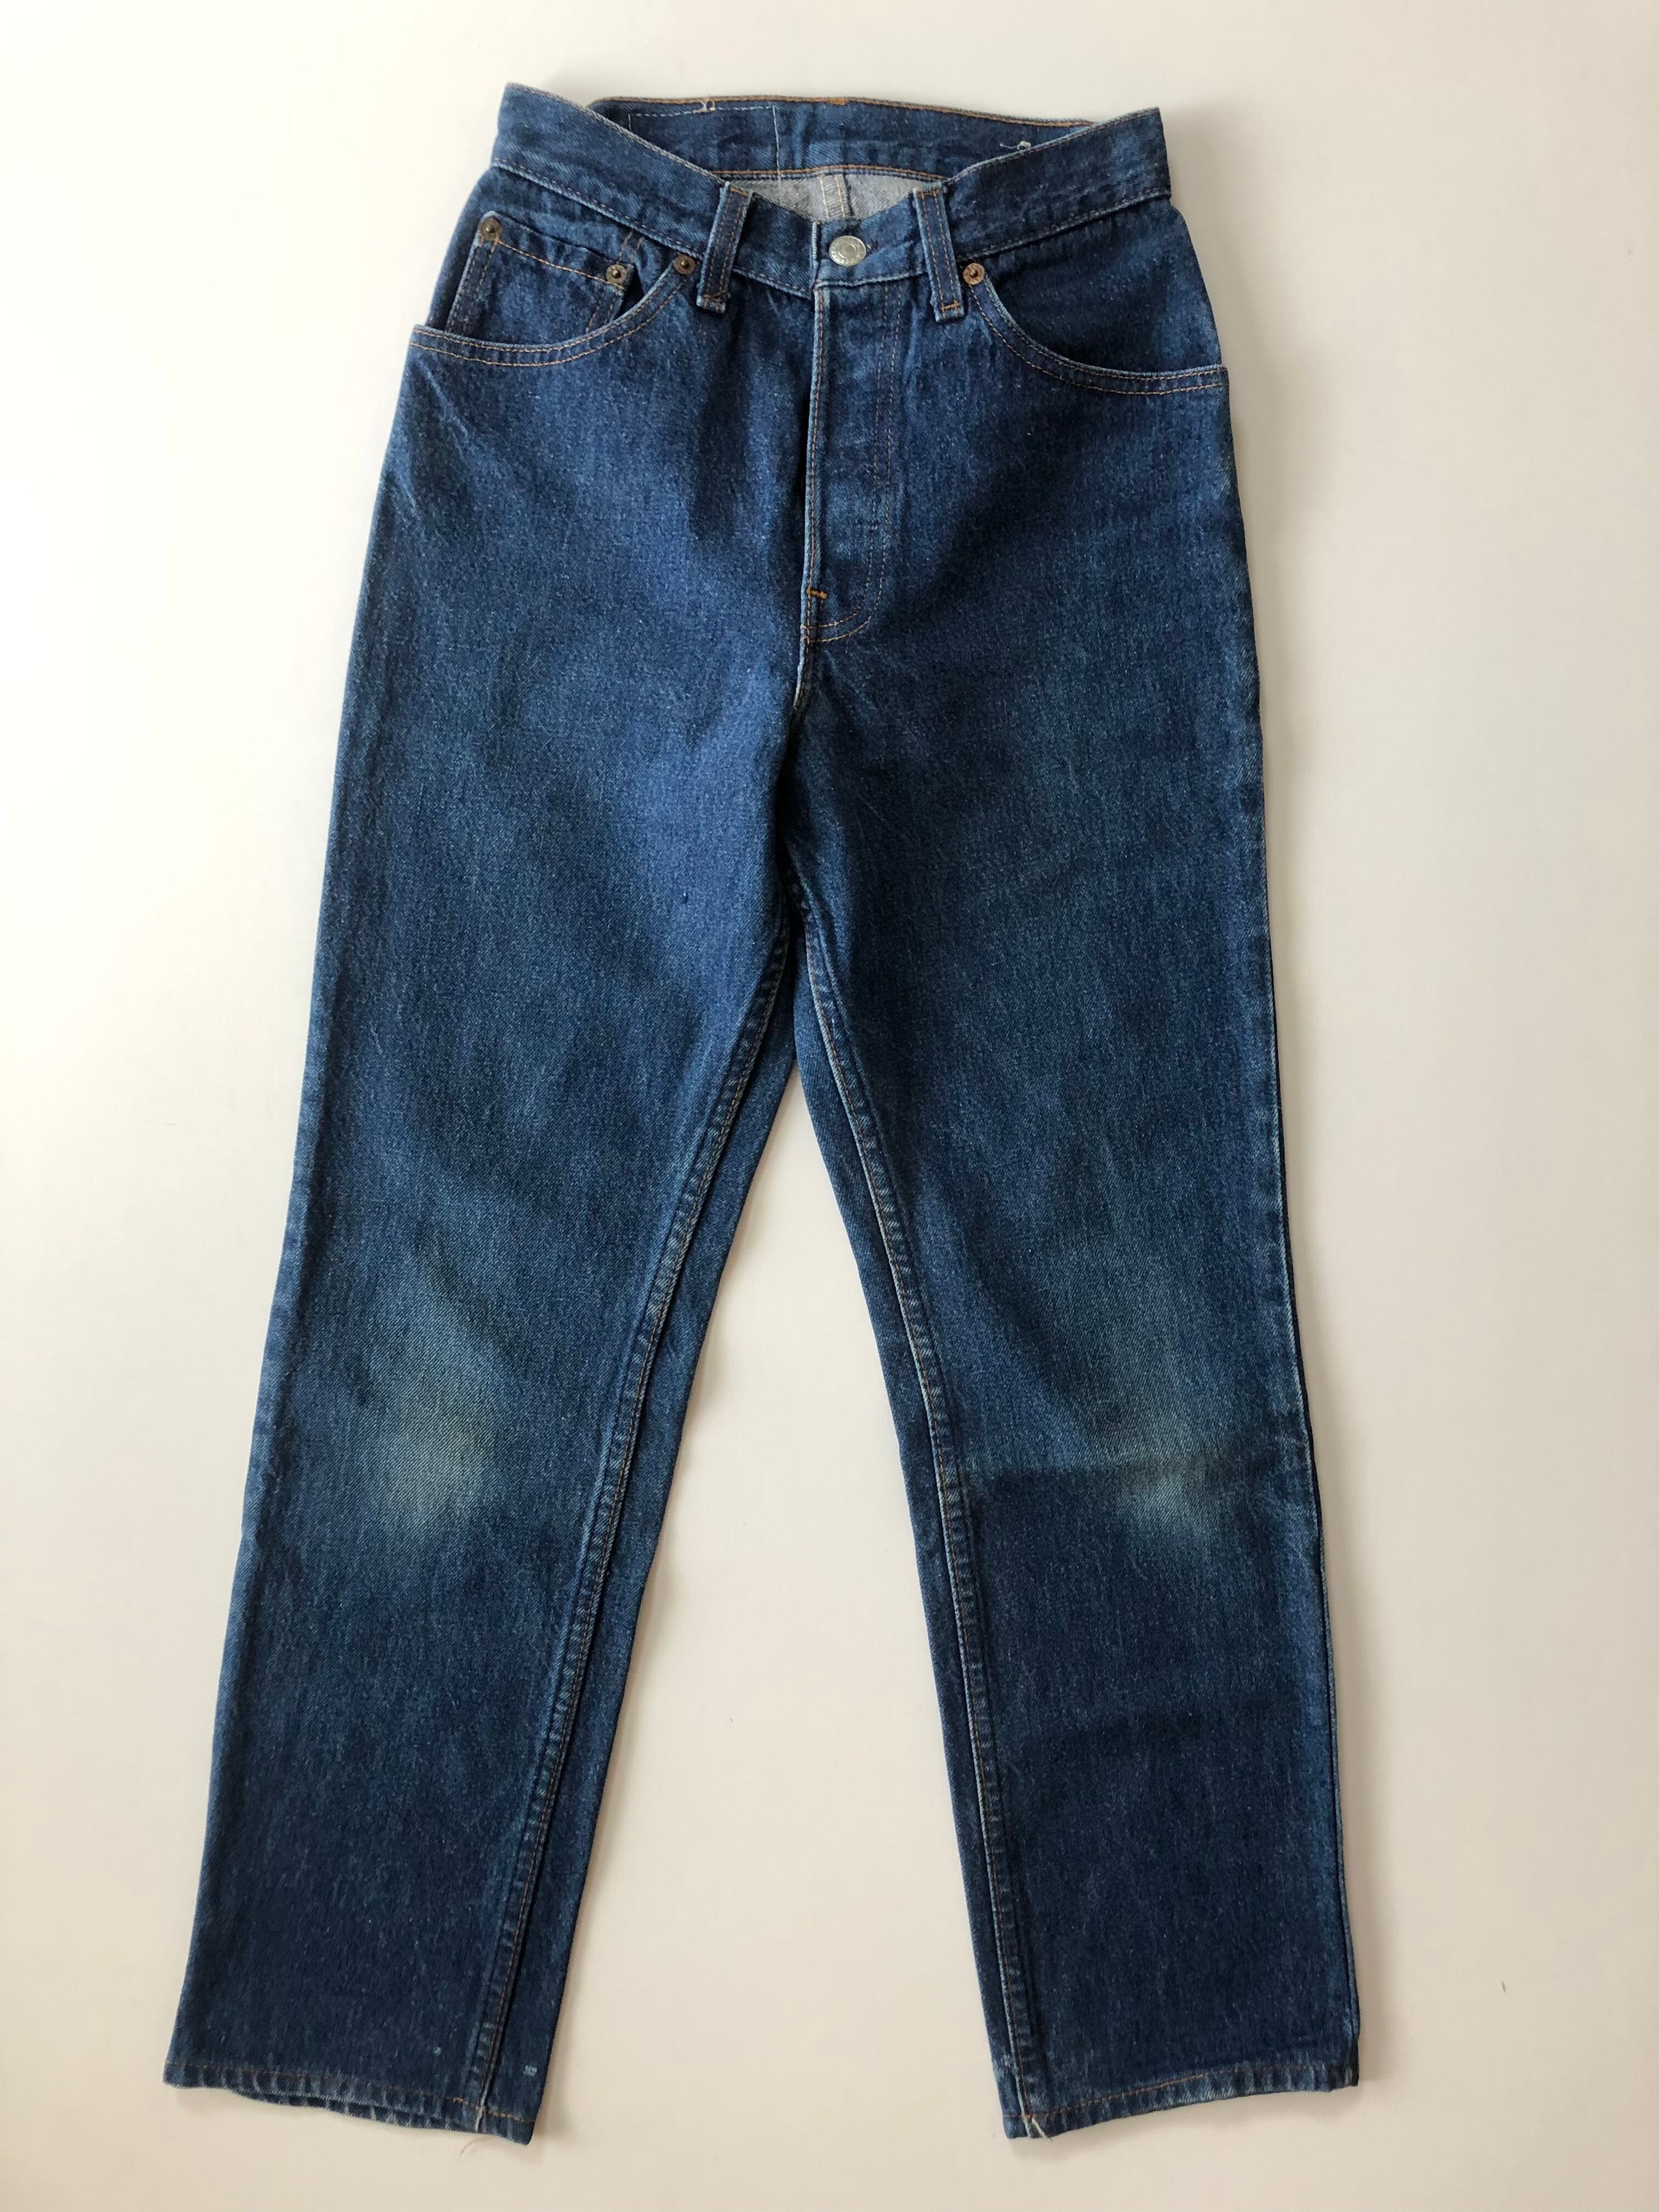 90's made in USA Levi's 501 リーバイス 462 | ＳＥＣＯＮＤ HAND RED